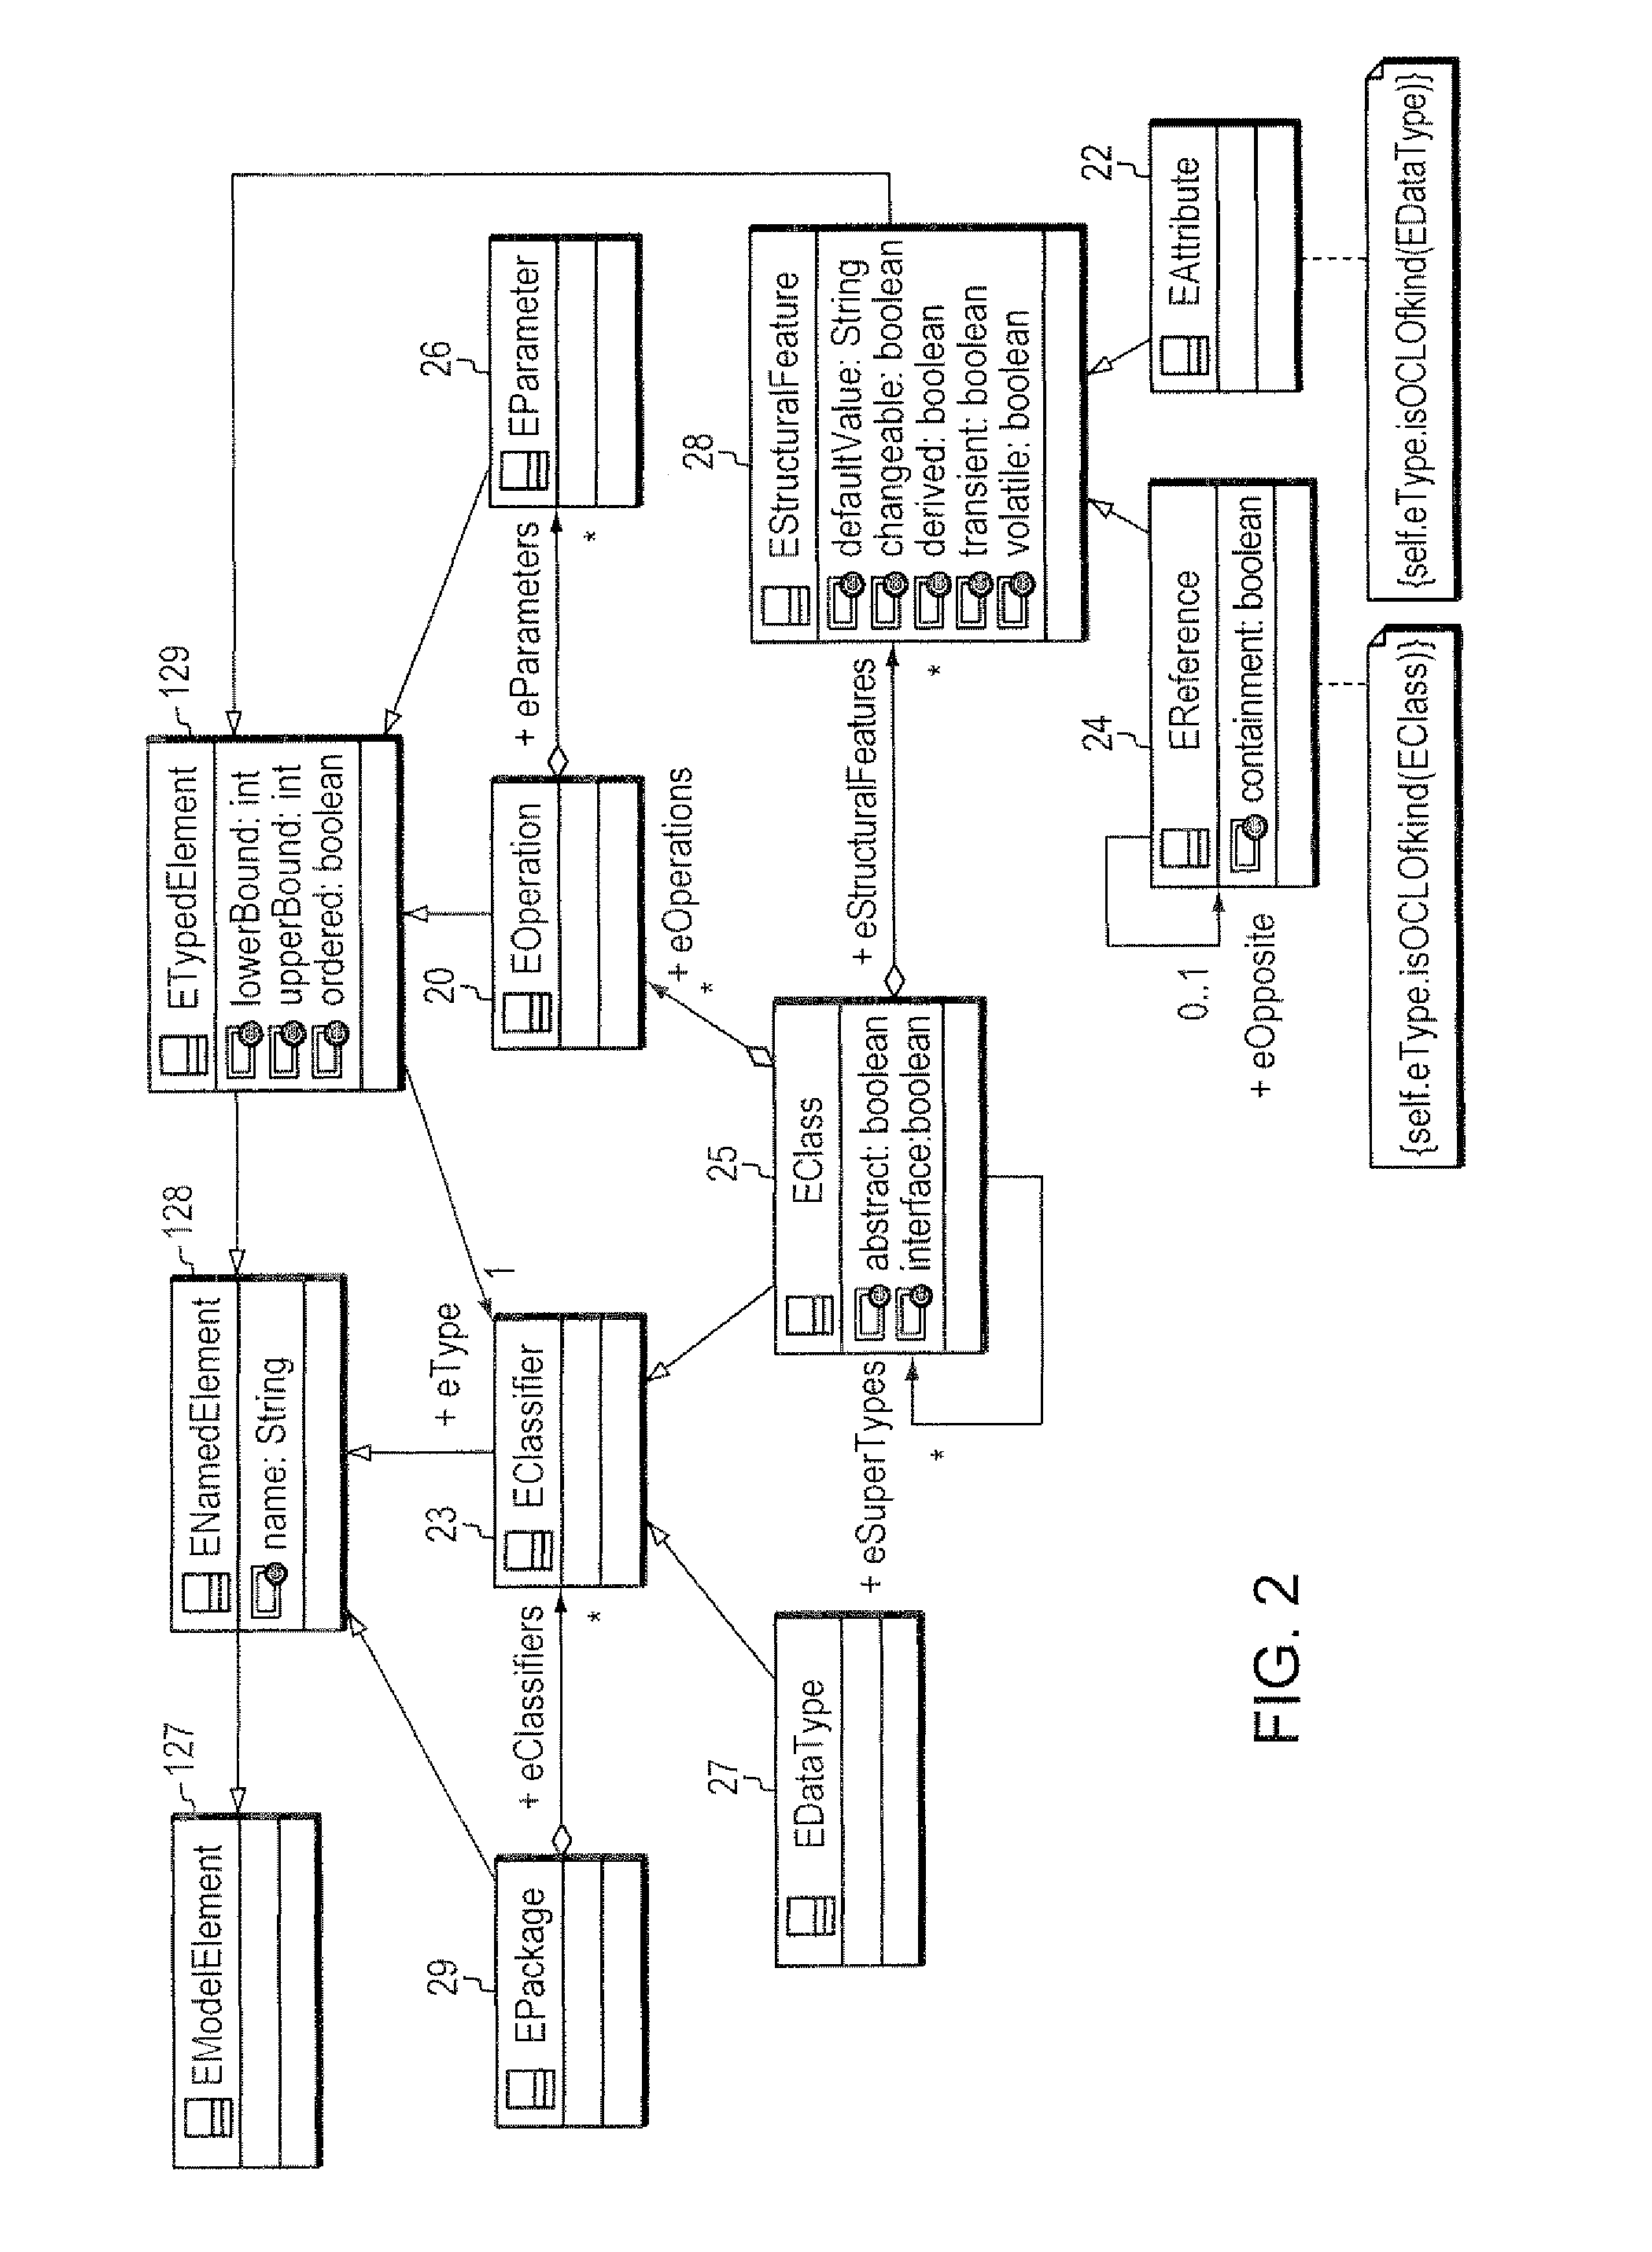 Configurable Pattern Detection Method and Apparatus